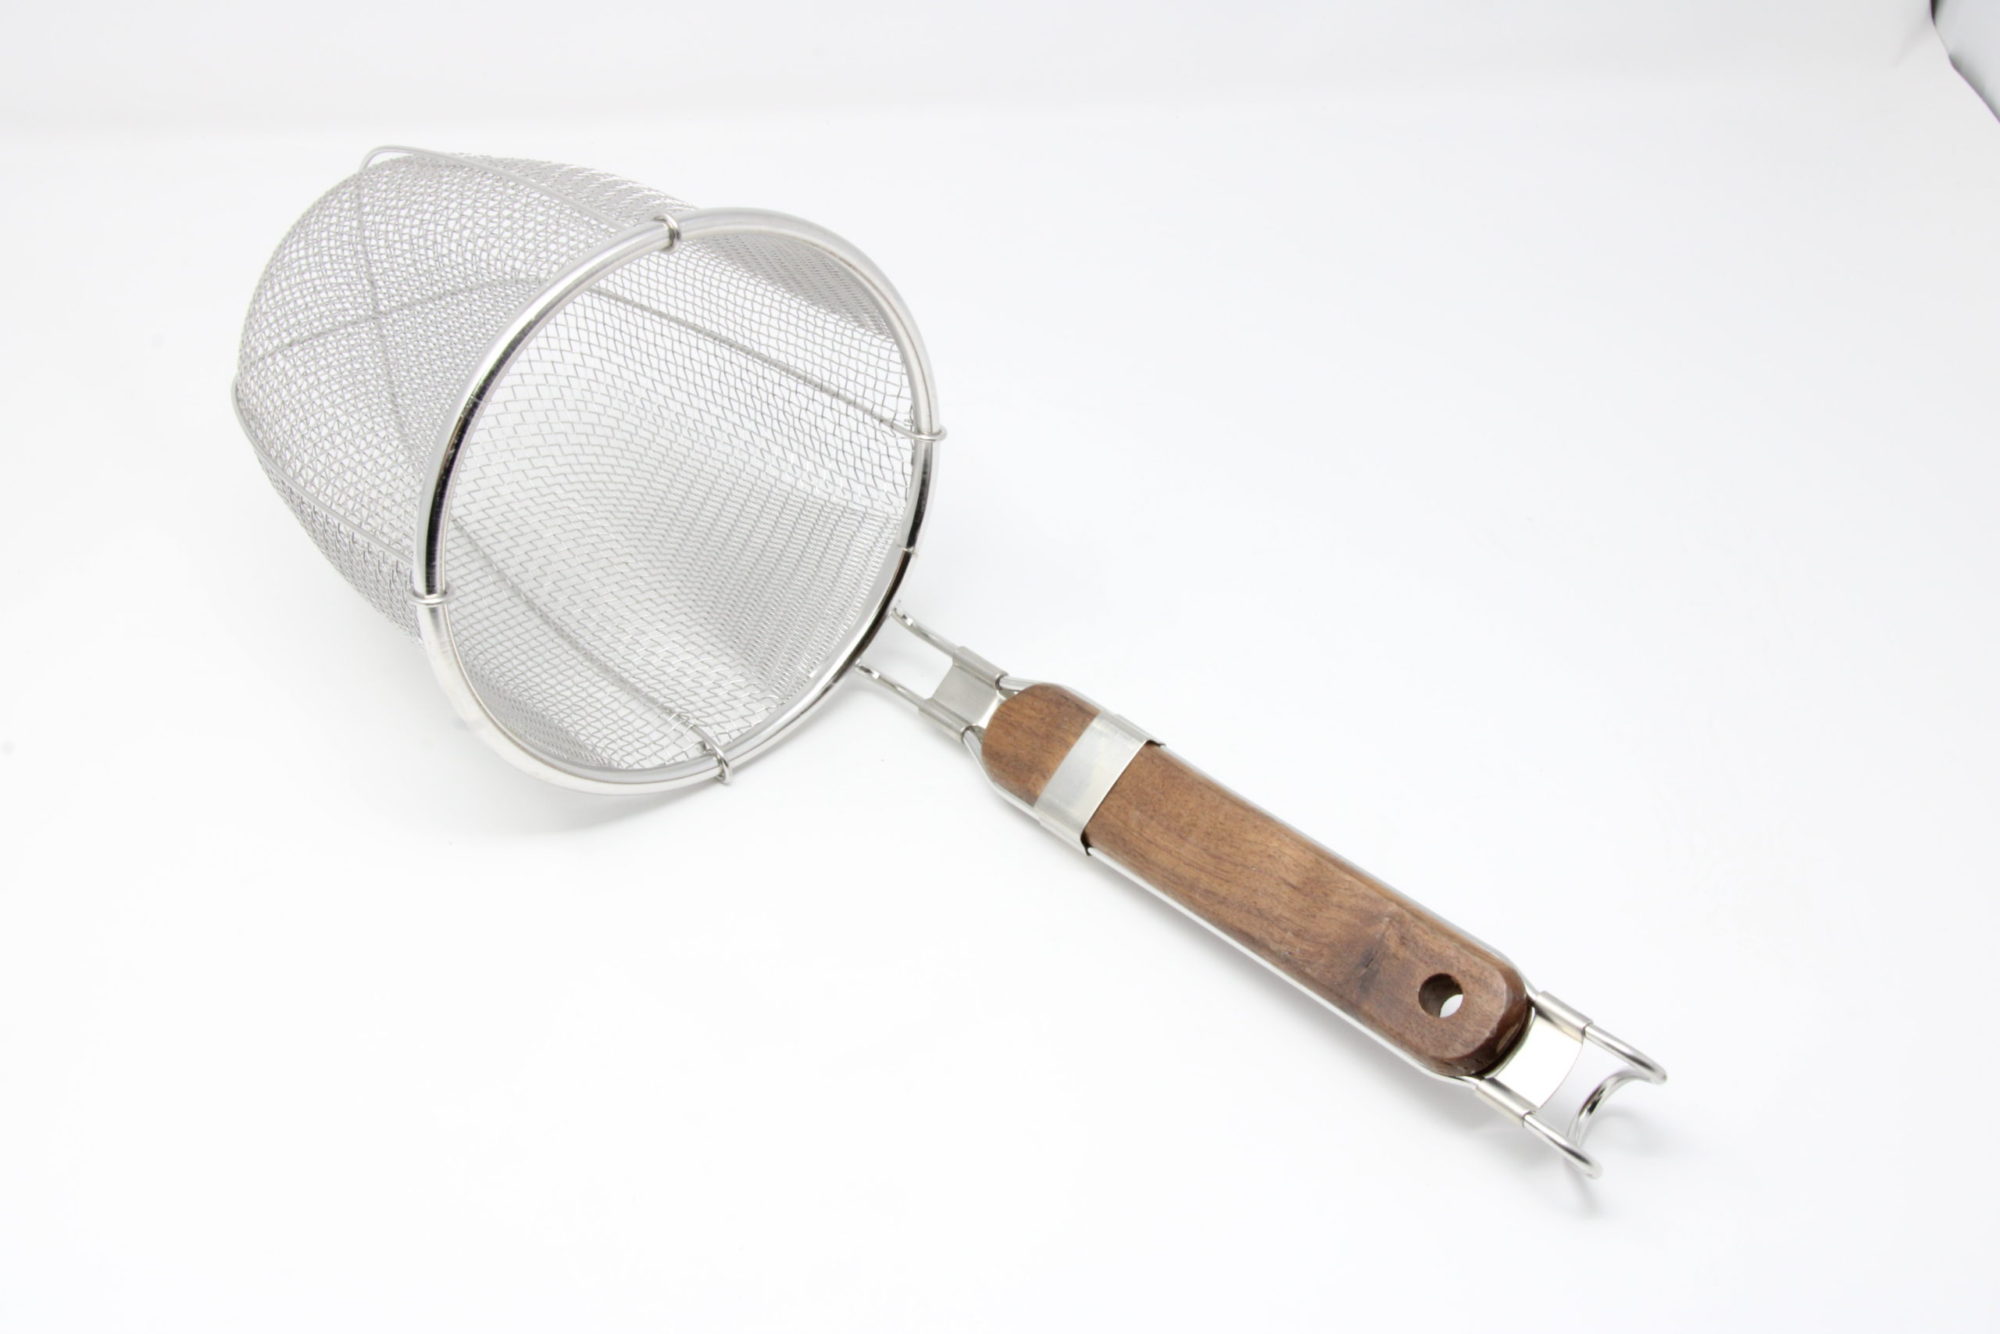 BAY-Lee Stainless Noodle Strainer